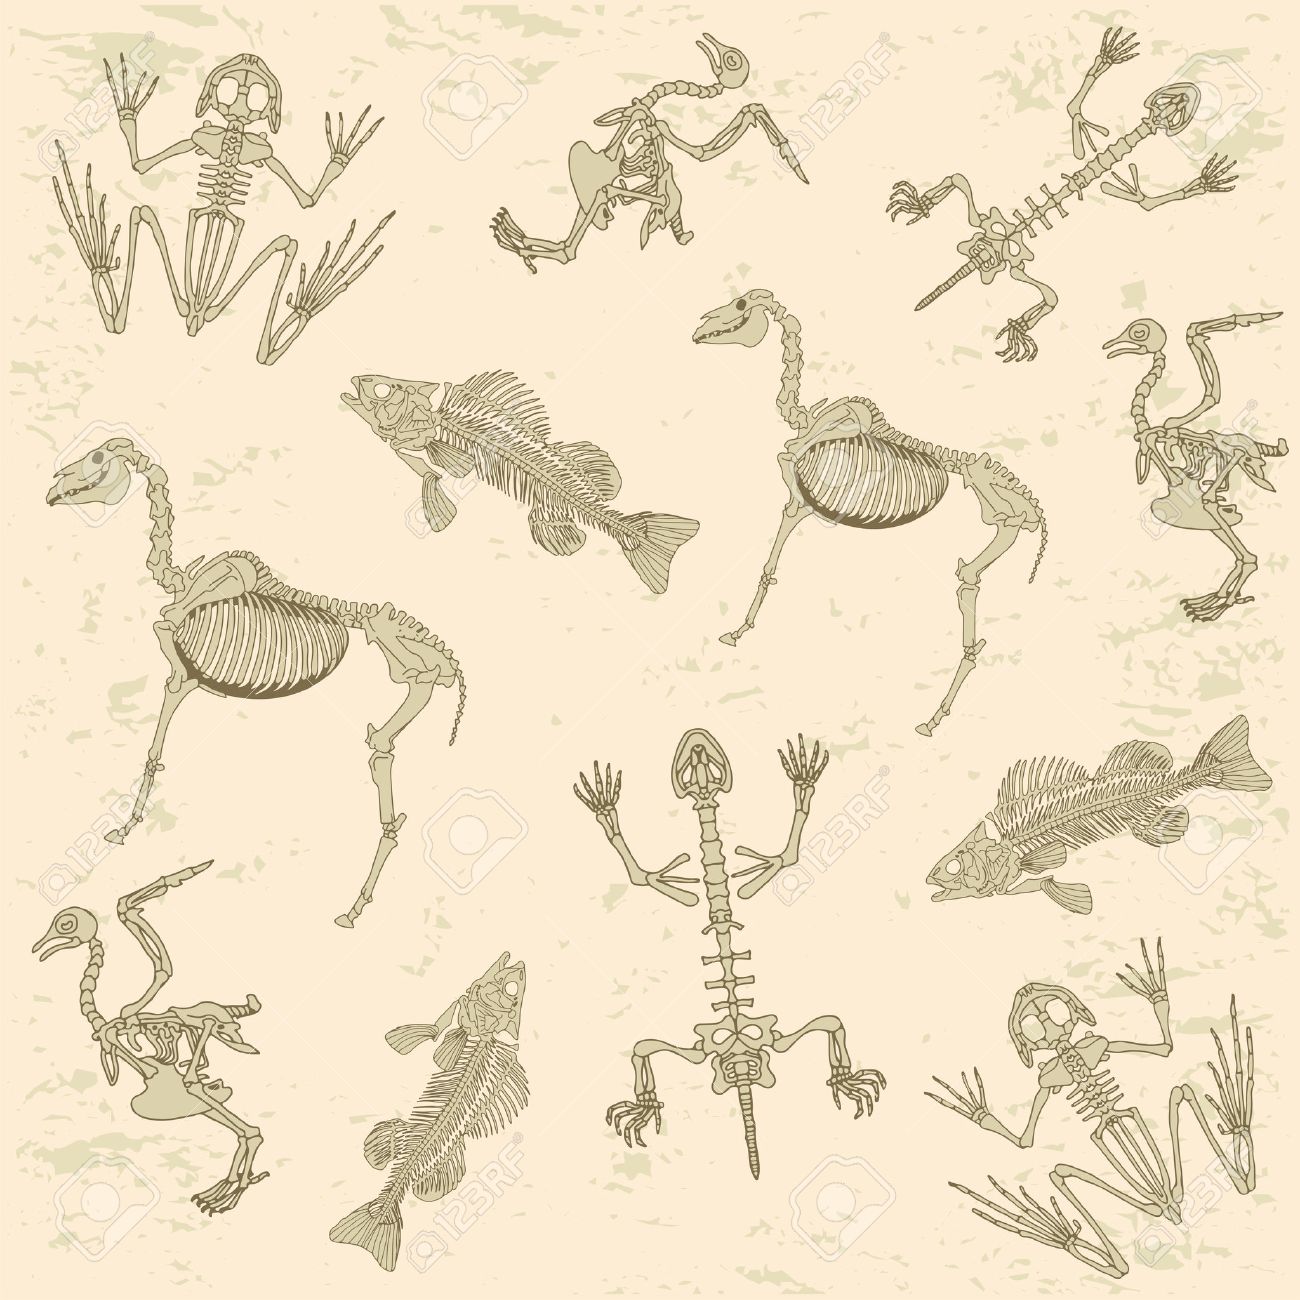 Animals Anatomy Skeleton Of Horse Pigeon Frog And Turtle